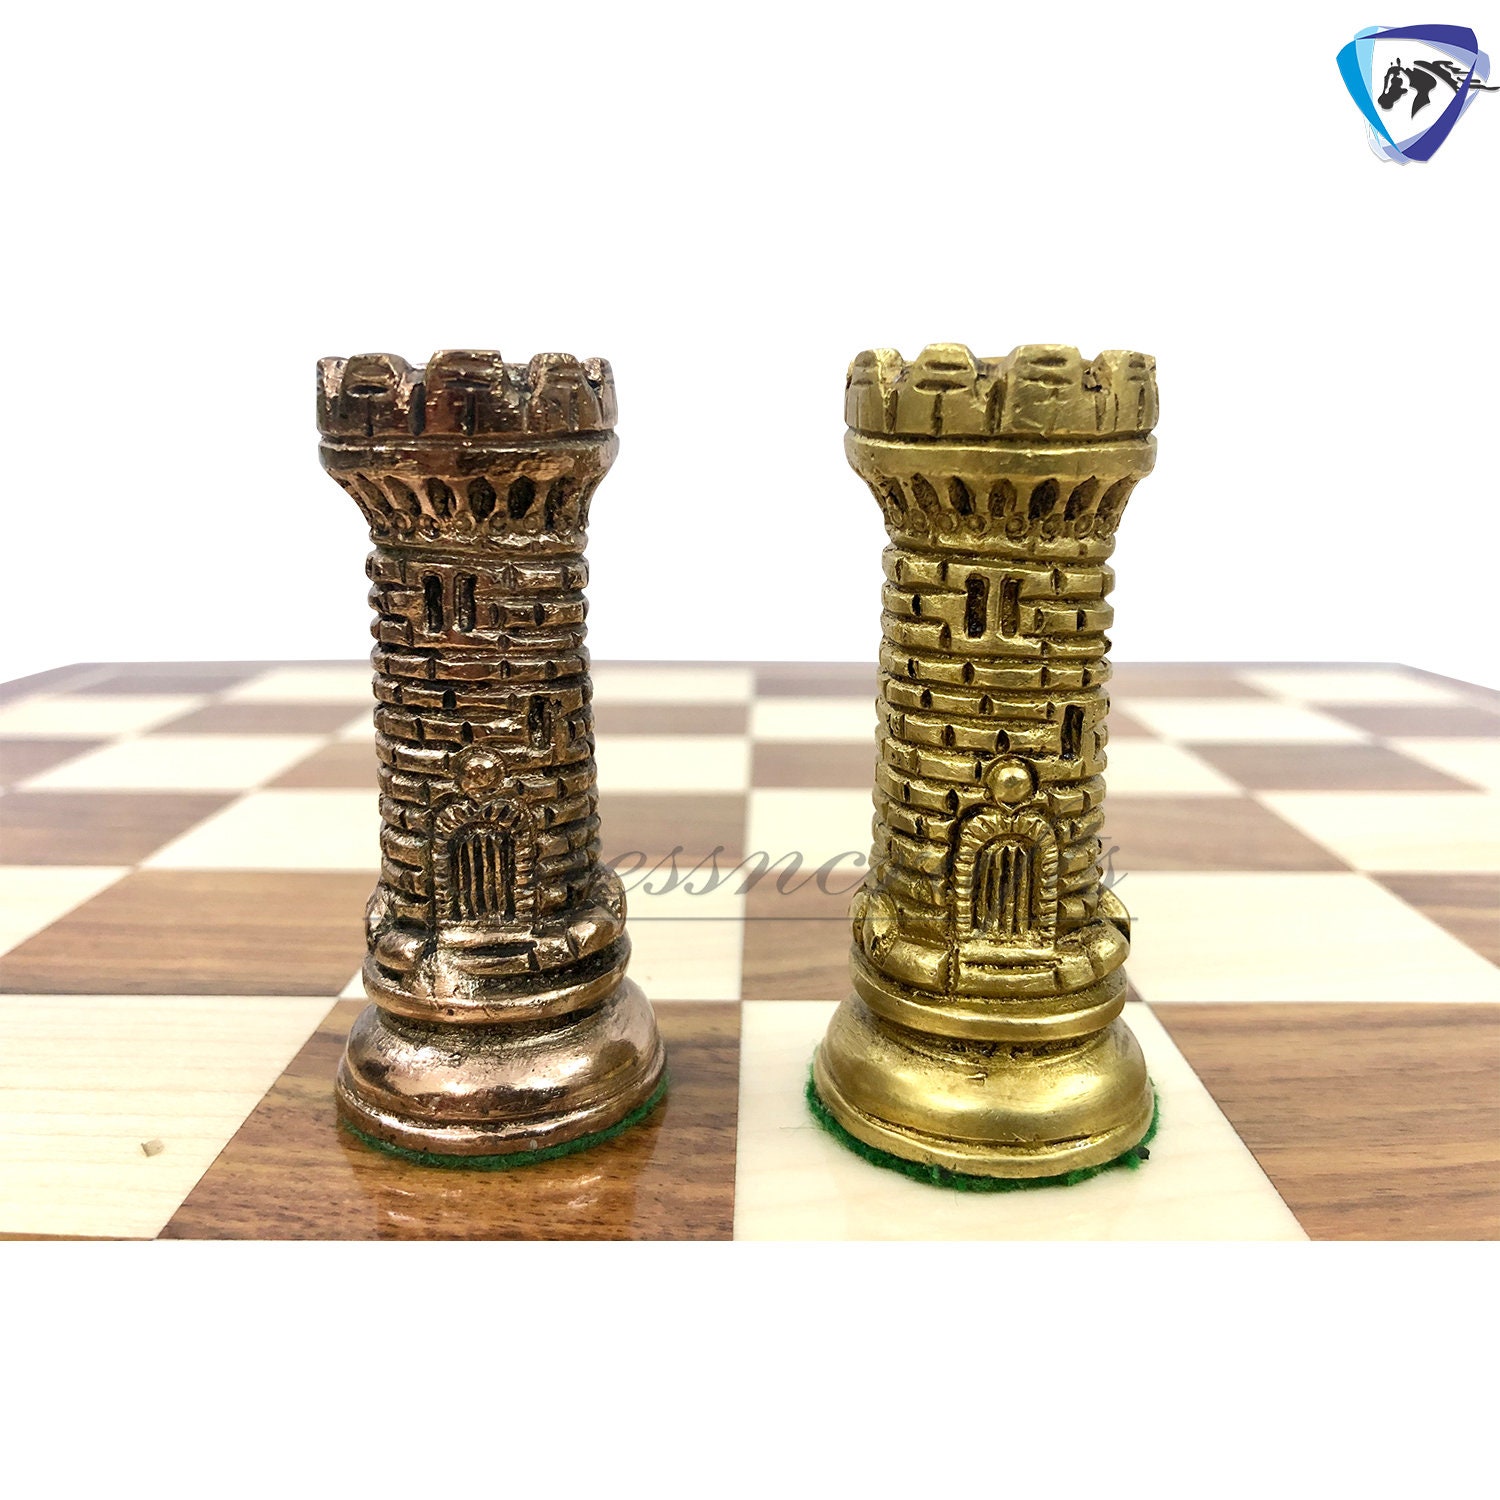 INDIAN ART VILLA Brass Chess with Realistic Piece (Gold + Silver) –  IndianArtVilla